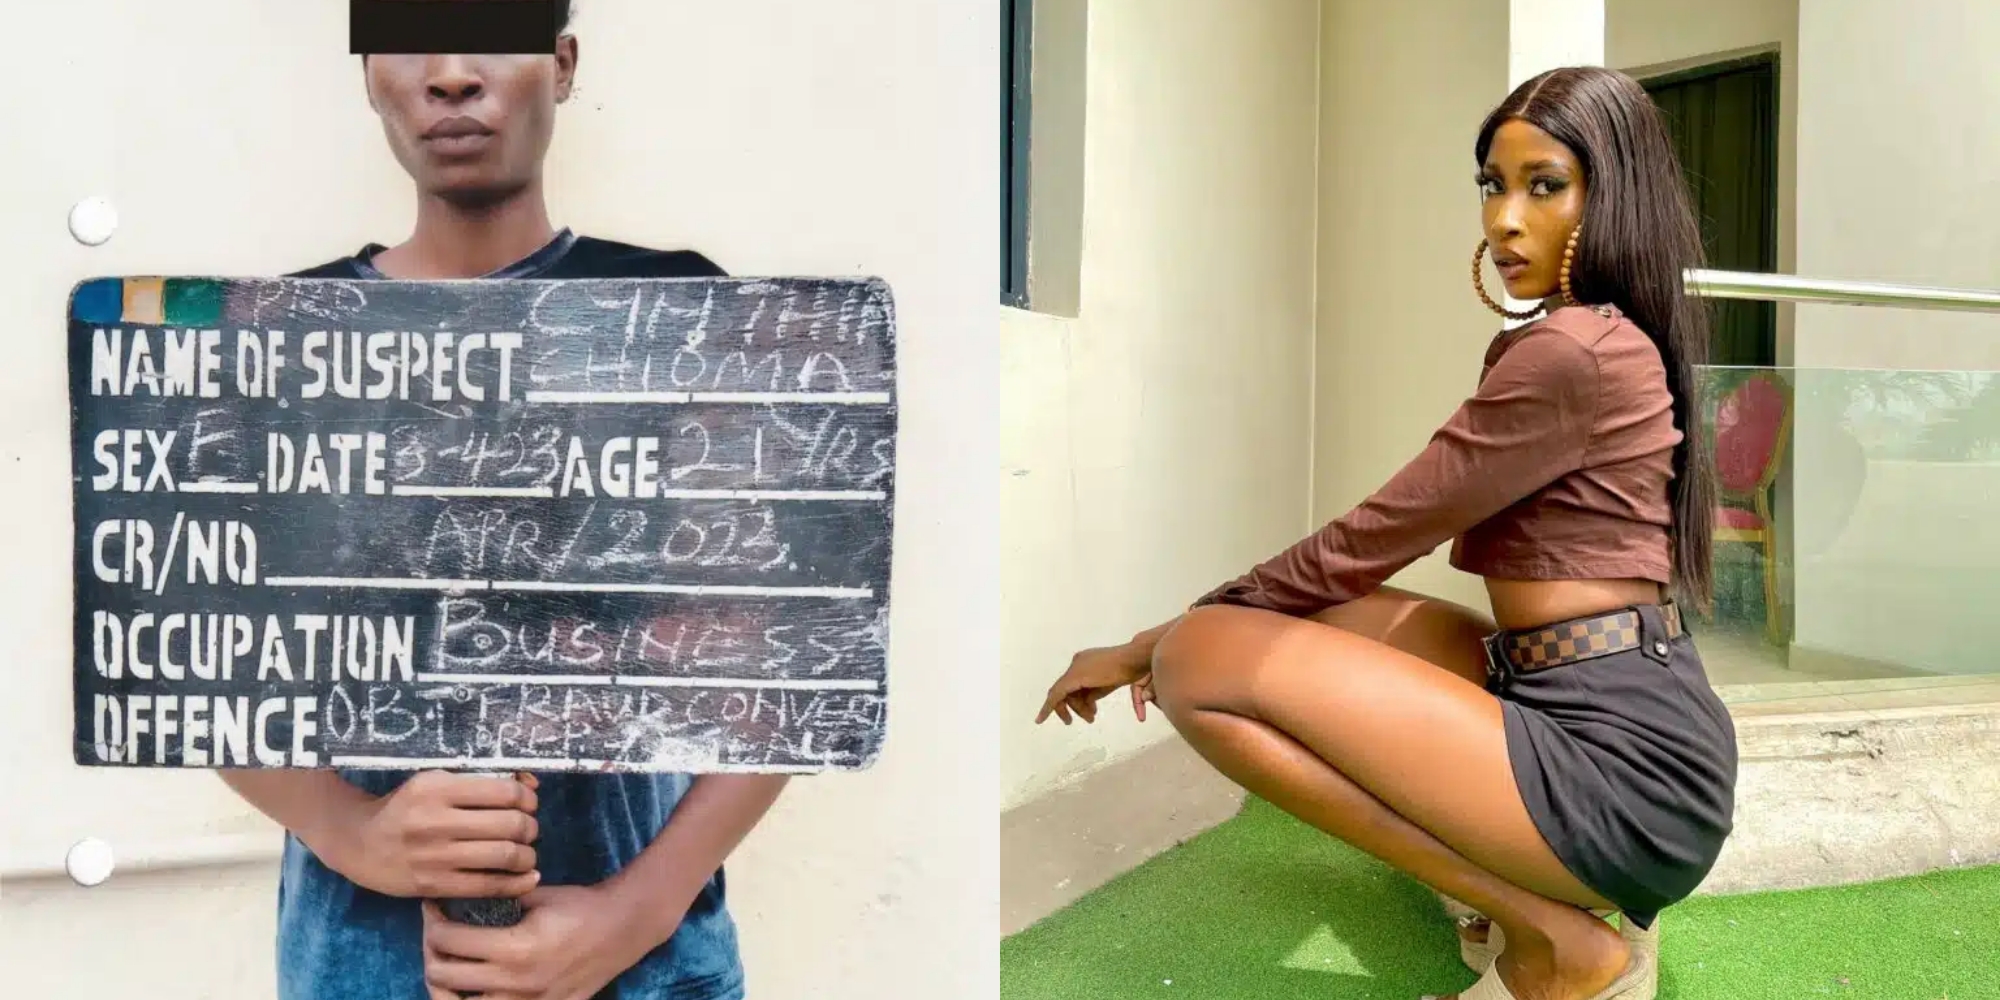 21-year-old lady arrested for defrauding German man of $220,000 in fake marriage scam